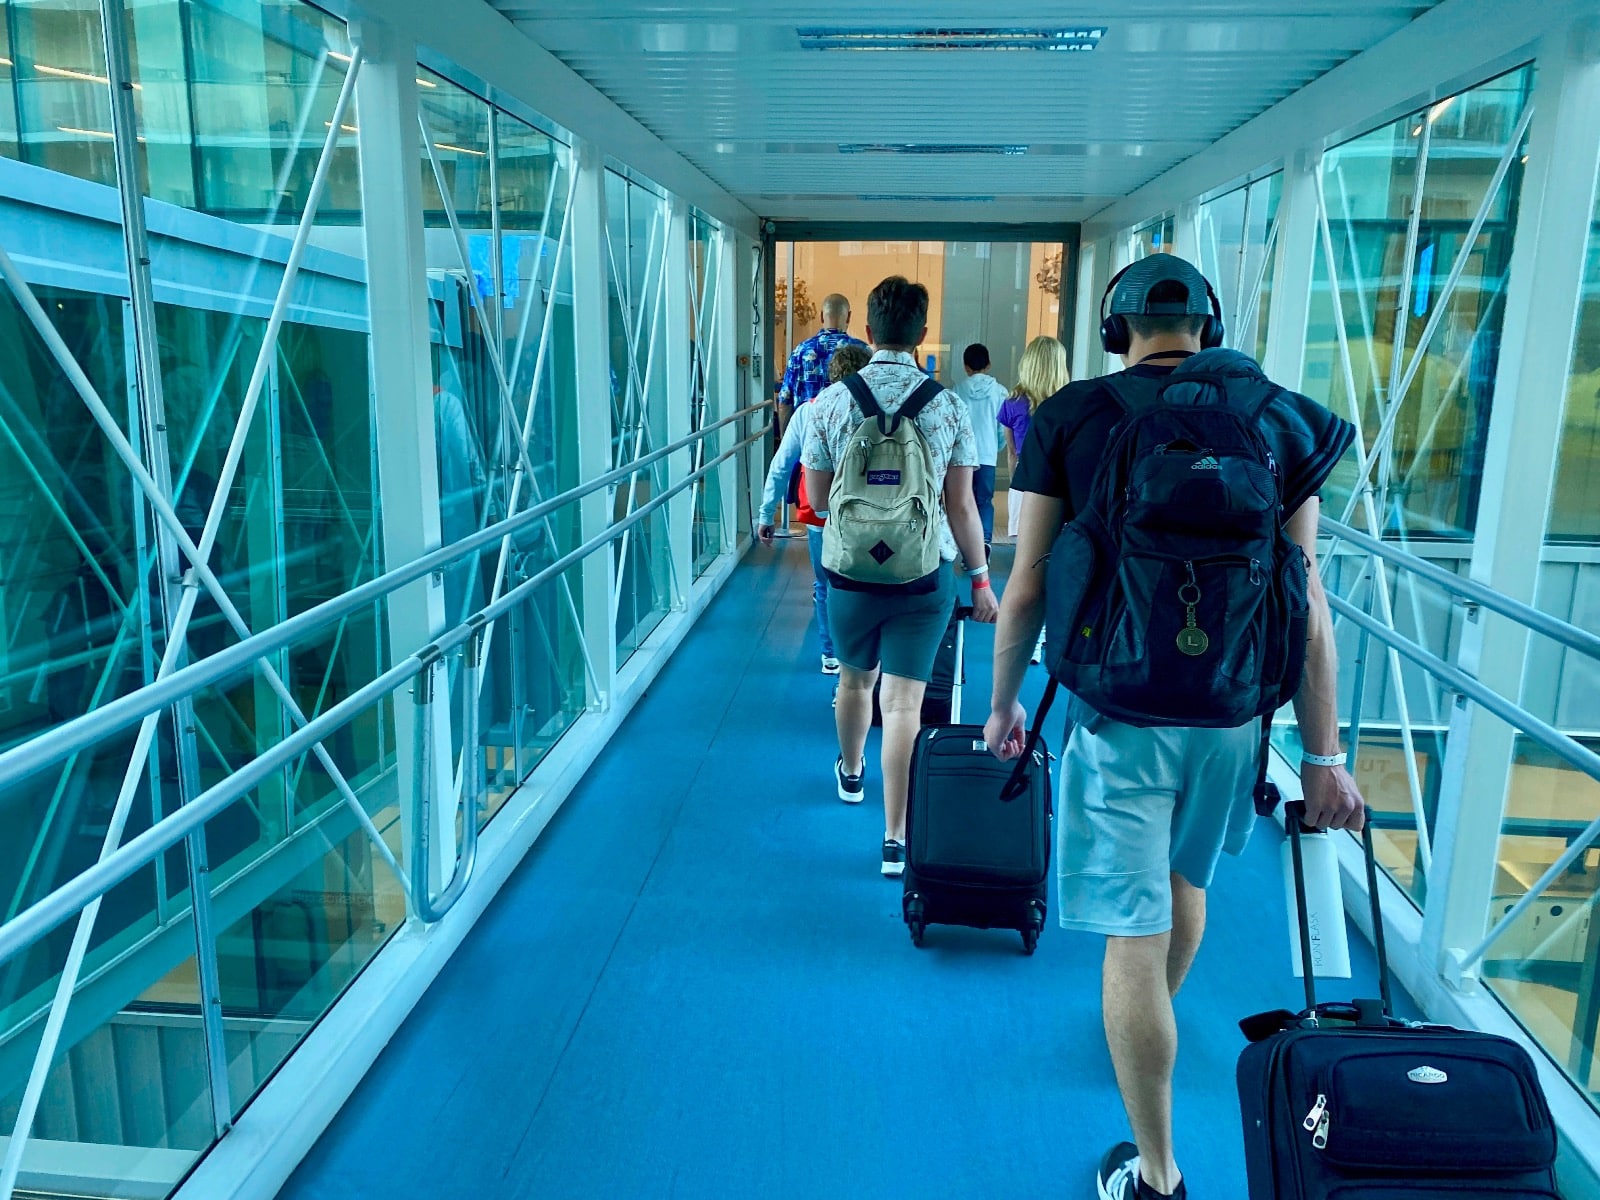 a group of people walking down a walkway with luggage